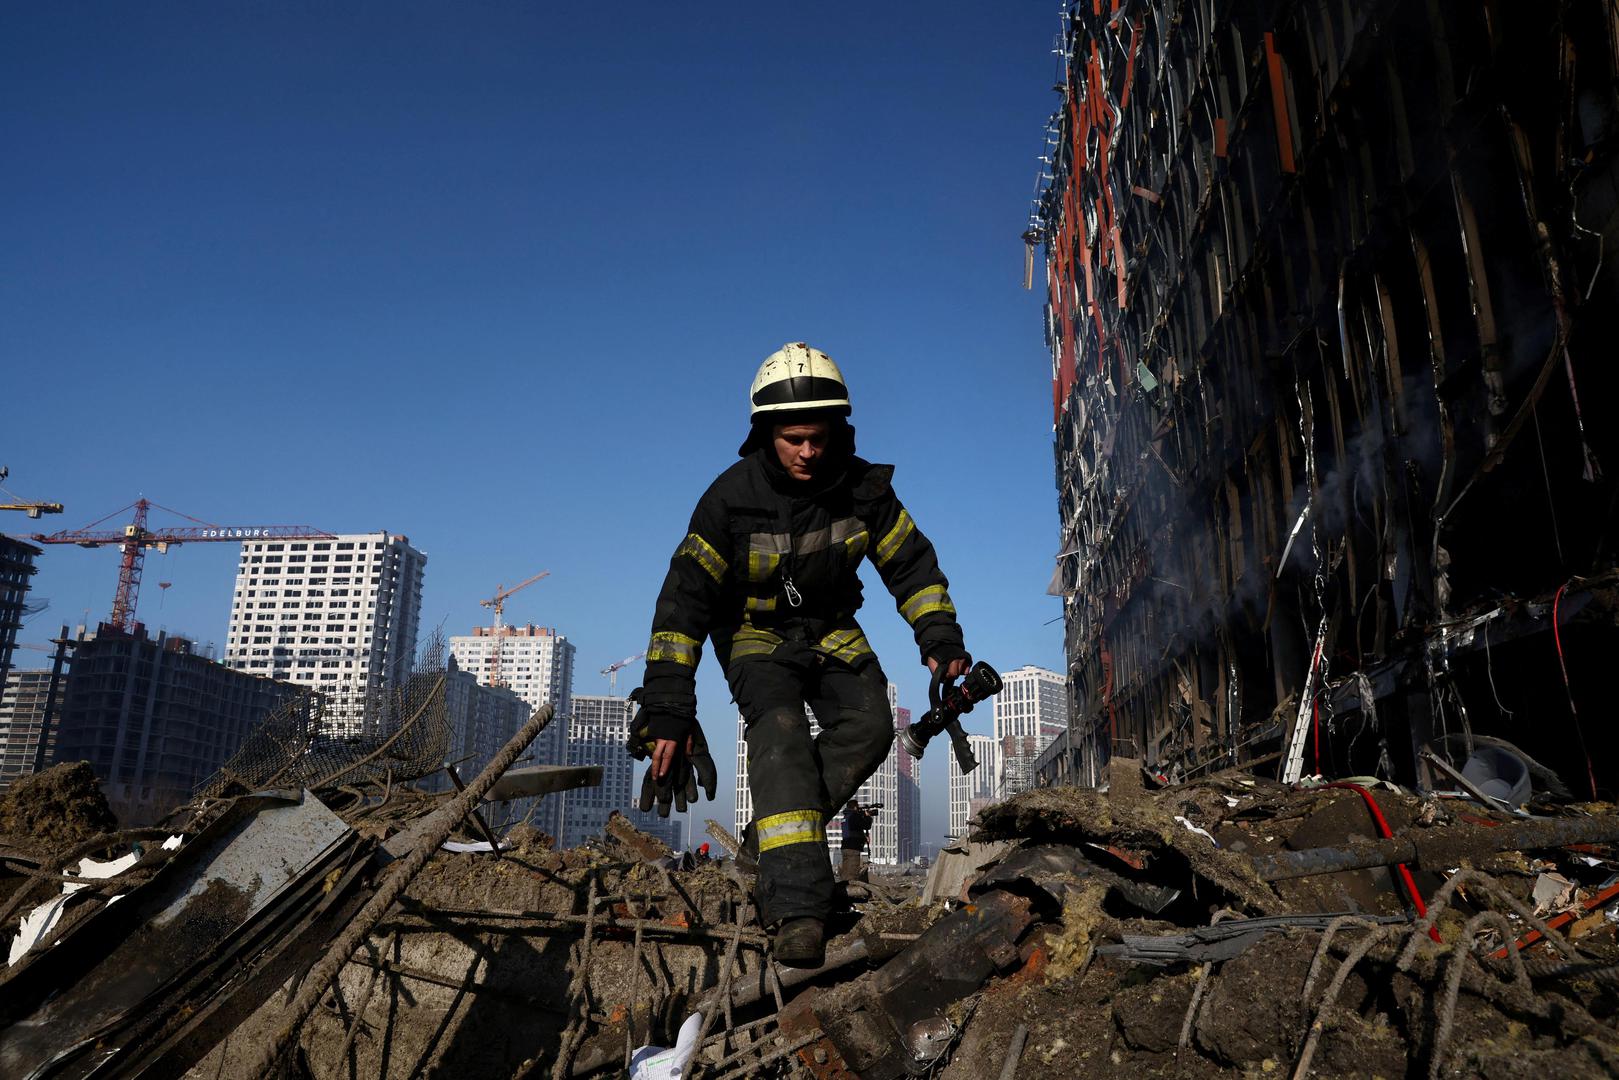 A rescuer walks through debris at the site of a bombing at a shopping center as Russia's invasion of Ukraine continues, in Kyiv, Ukraine March 21, 2022. REUTERS/Marko Djurica Photo: MARKO DJURICA/REUTERS